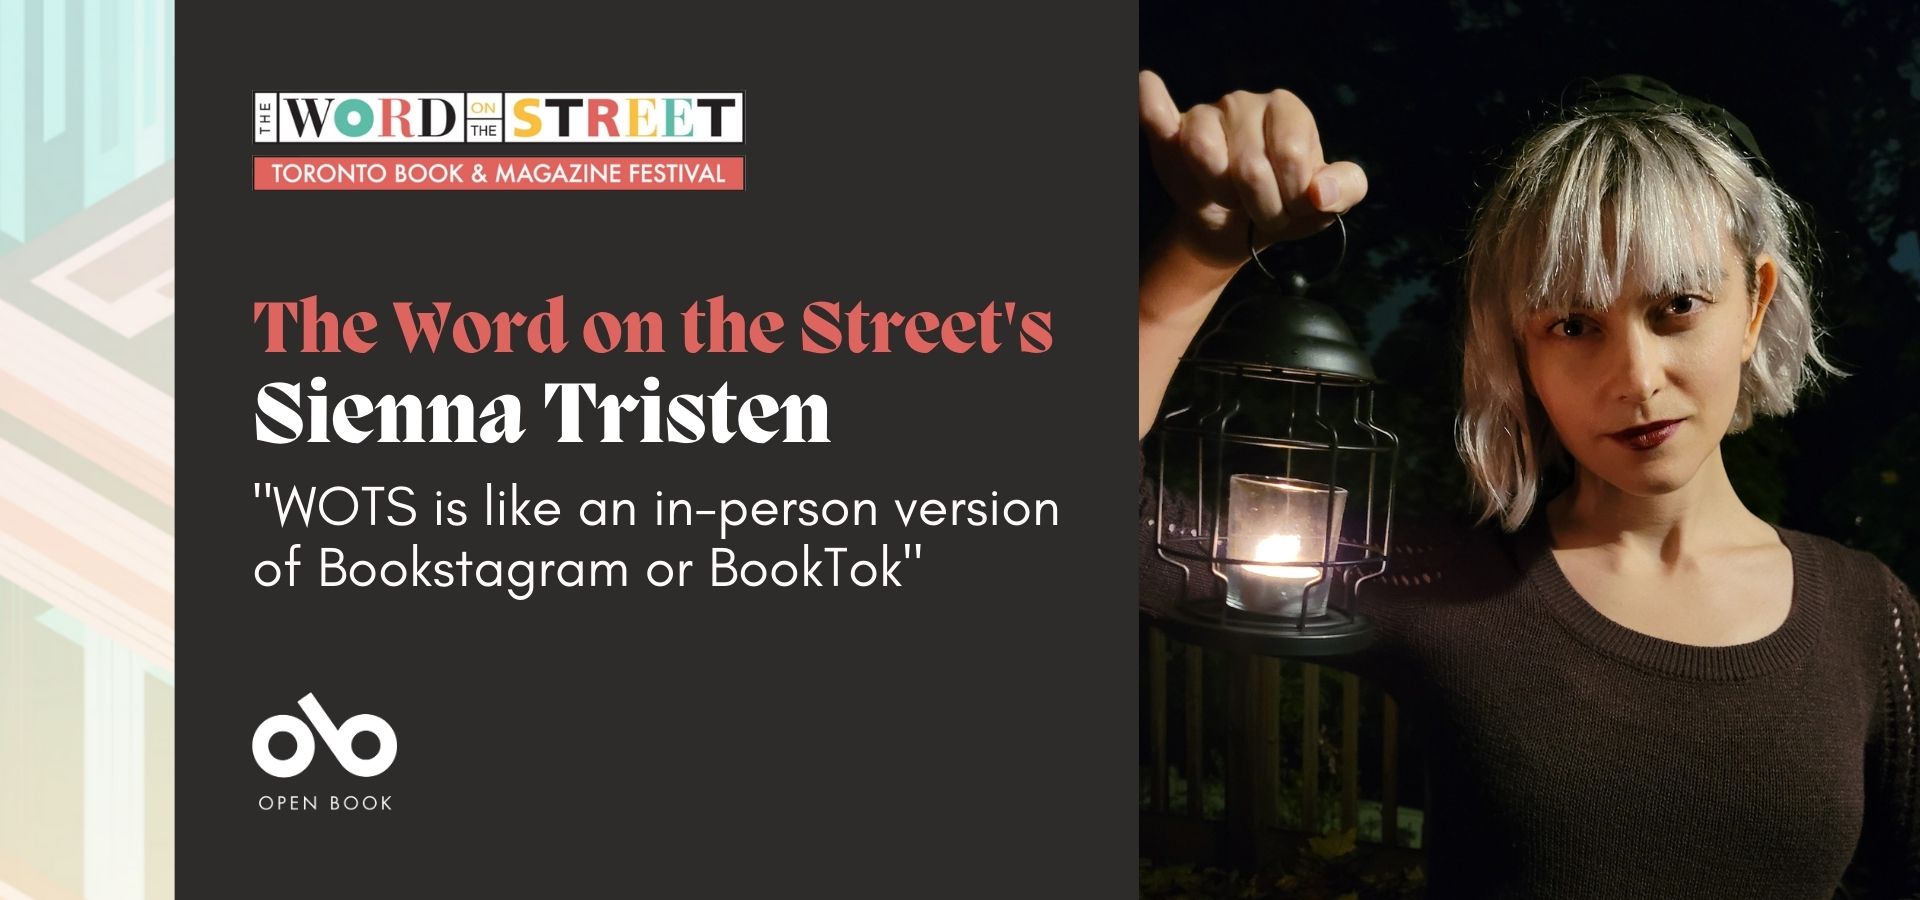 Dark grey banner image with photo of The Word on the Street programming manager Sienna Tristen. Text reads "The Word on the Street's  Sienna Tristen" and "WOTS is like an in-person version of Bookstagram or BookTok". Open Book and The Word on the Street logos bottom and top left